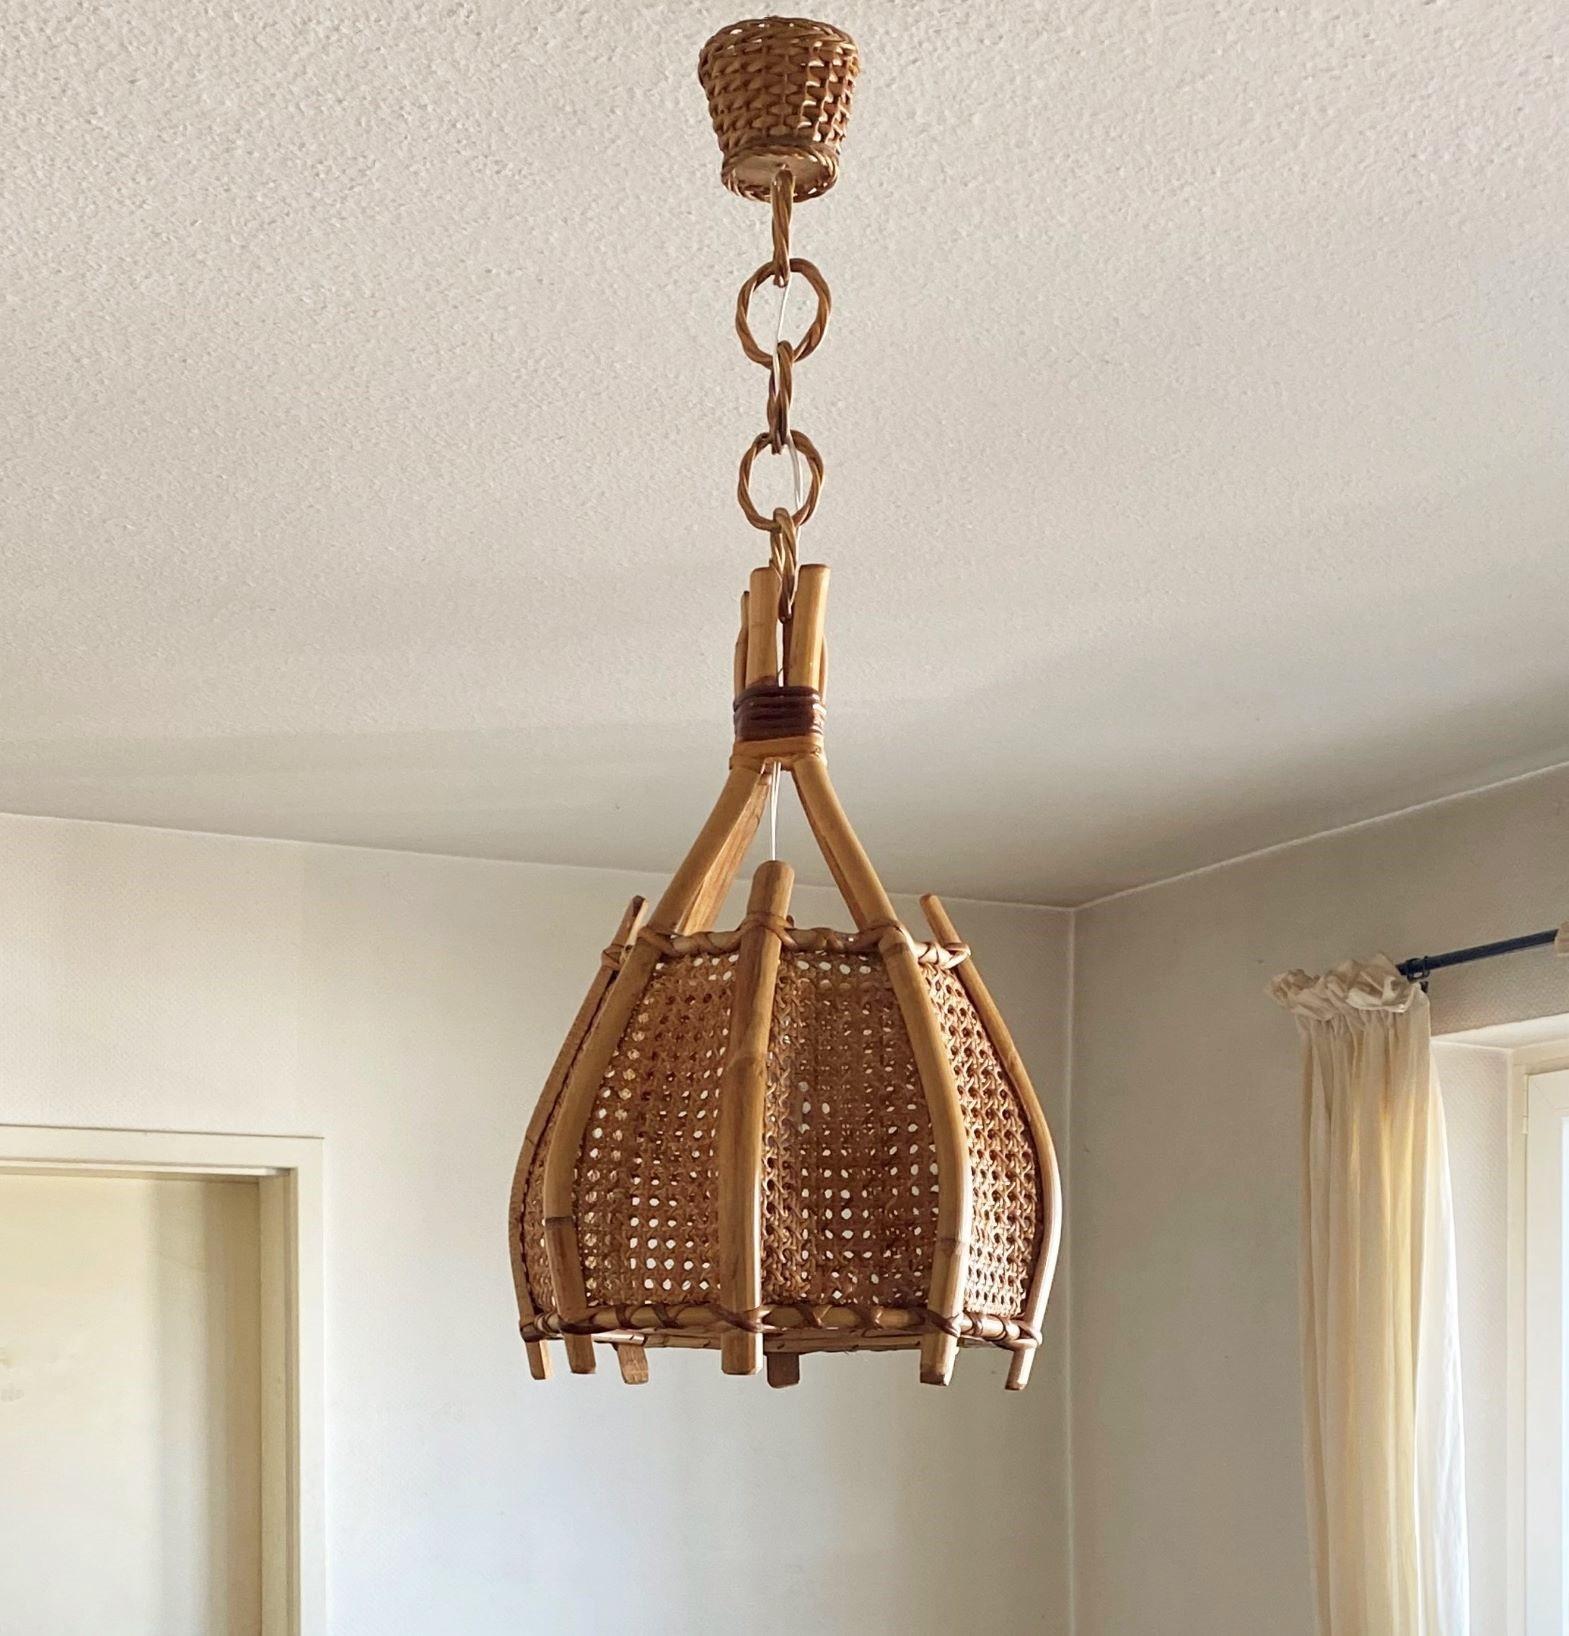 A lovely bamboo, wicker wire and rattan bell shaped pendant, Italy, 1960s. This suspension light is handcrafted of bamboo curved canes forming a lamp shade in woven wicker wire, with a beautiful rattan canopy in shape of a small basket, chain of